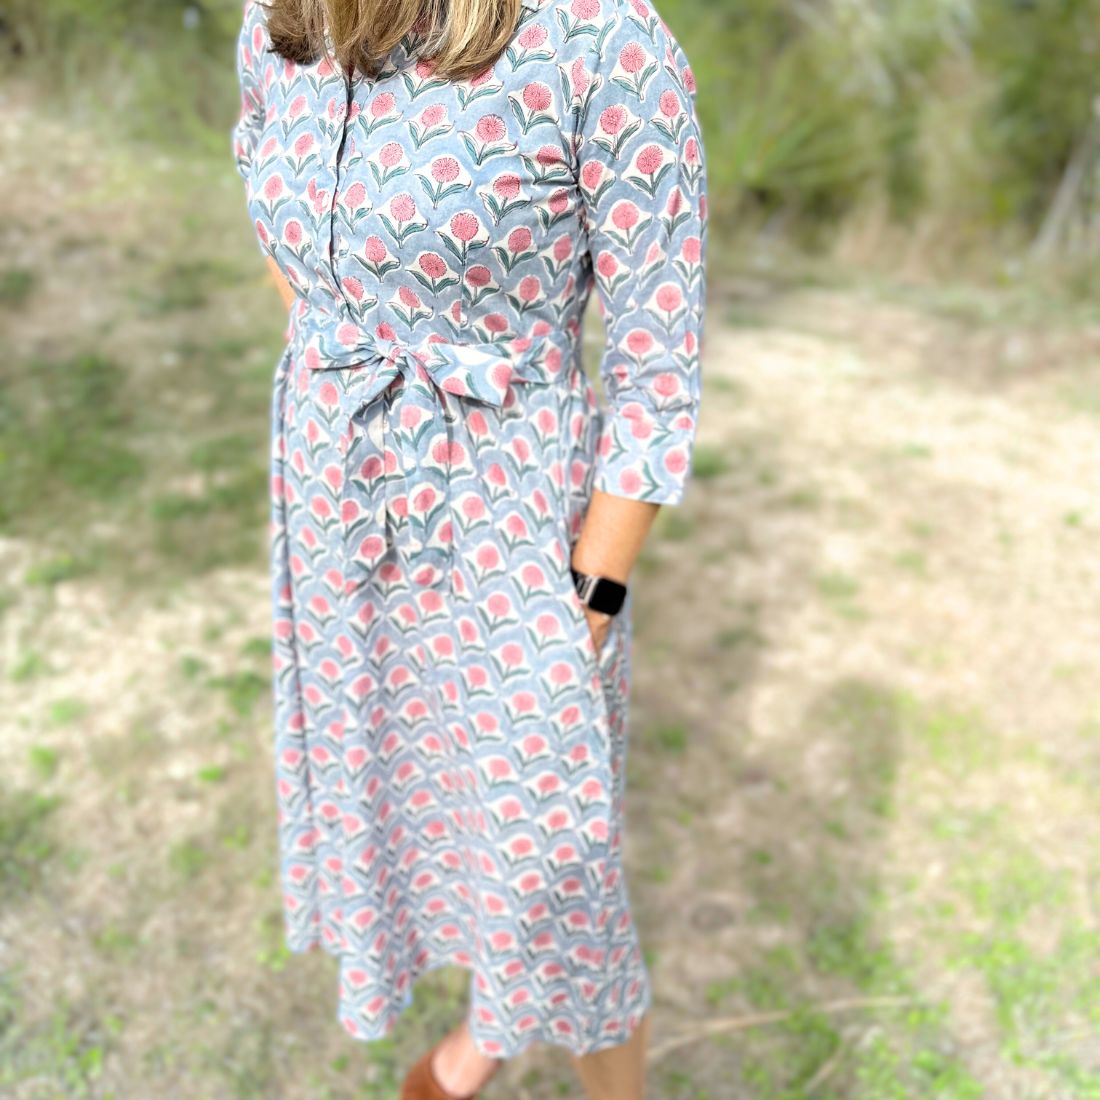 Sky chrysanthemum floral print cotton day dress with pockets.